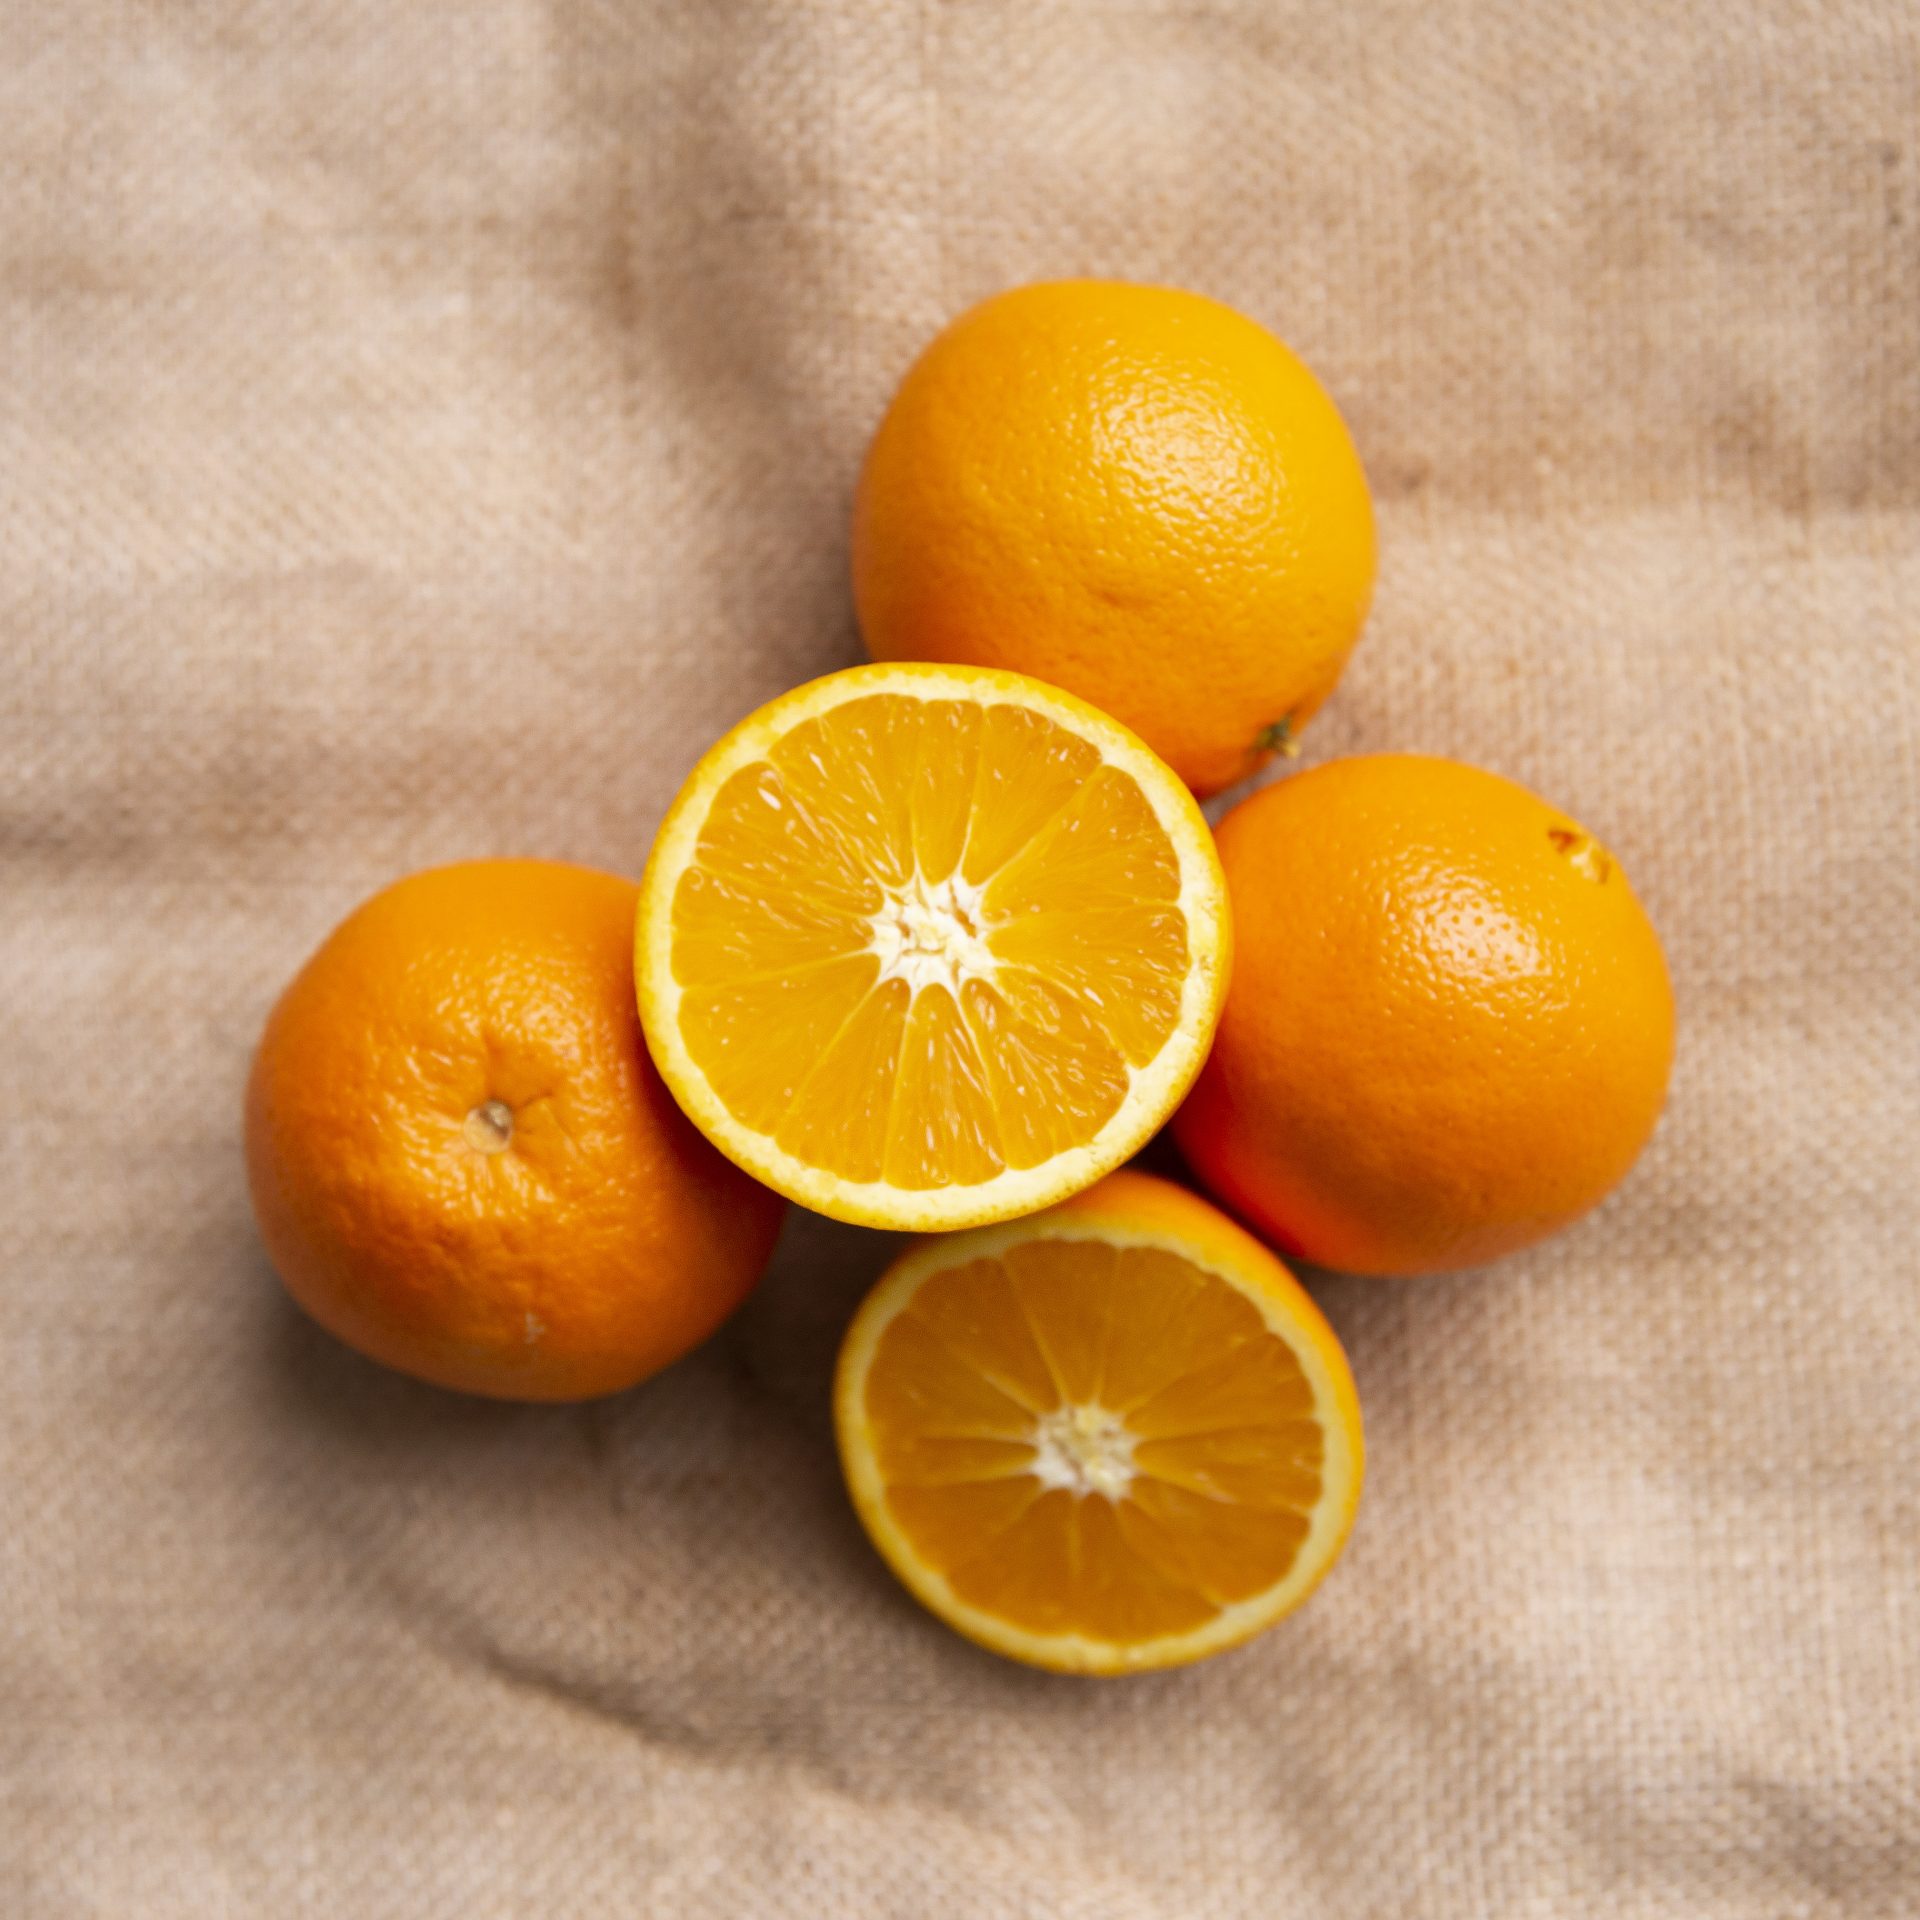 10 fun facts you didn't know about oranges - A Better Choice